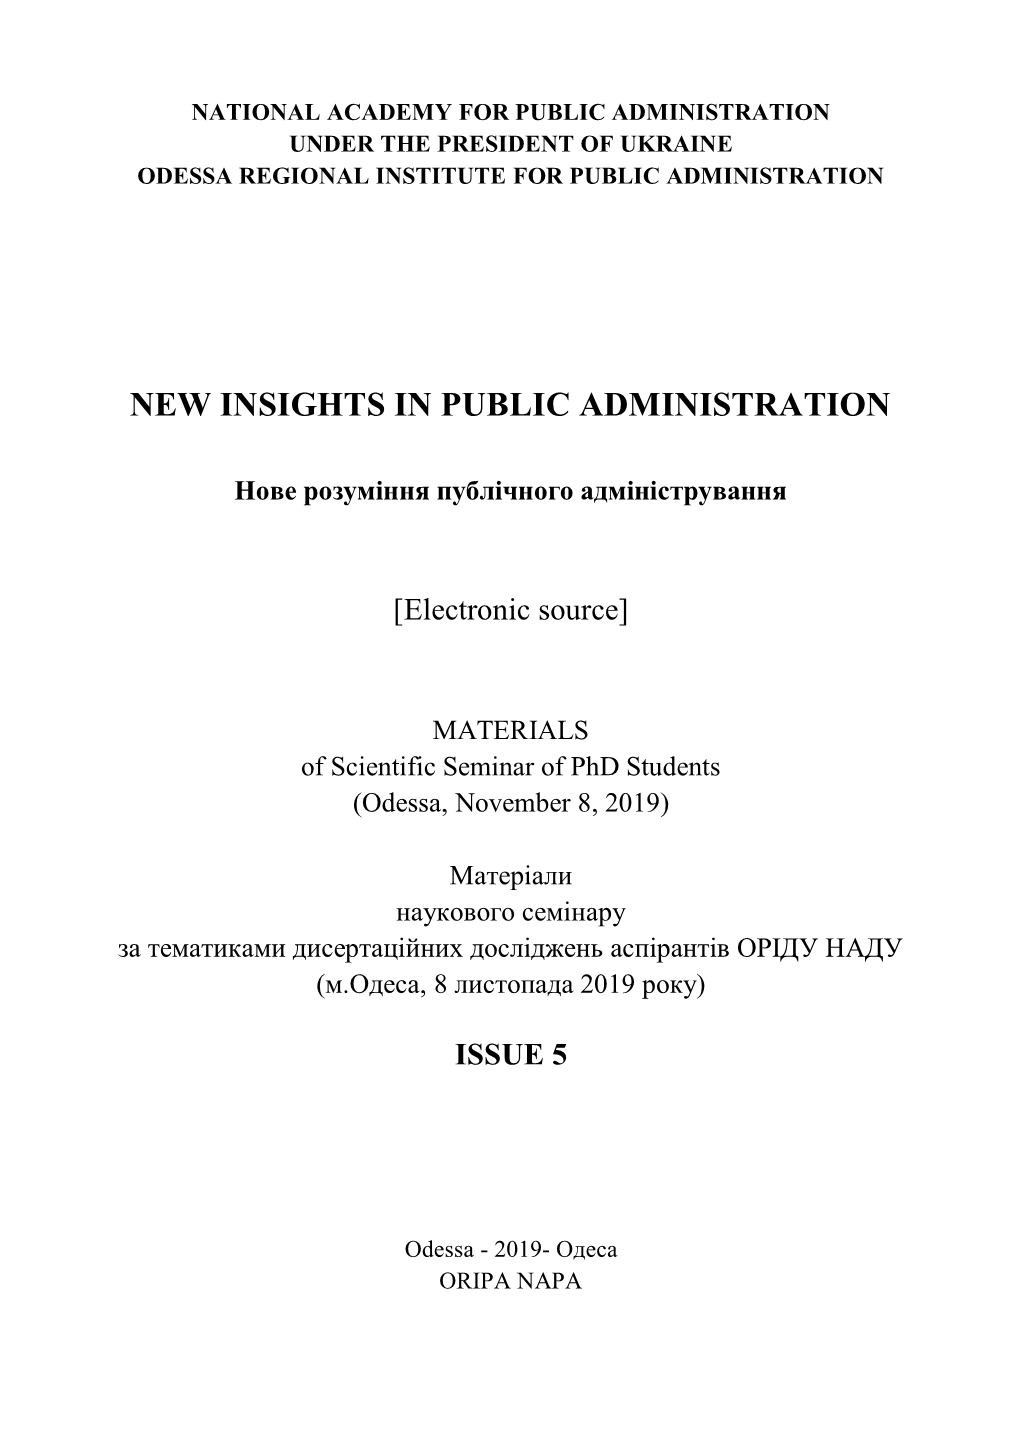 New Insights in Public Administration